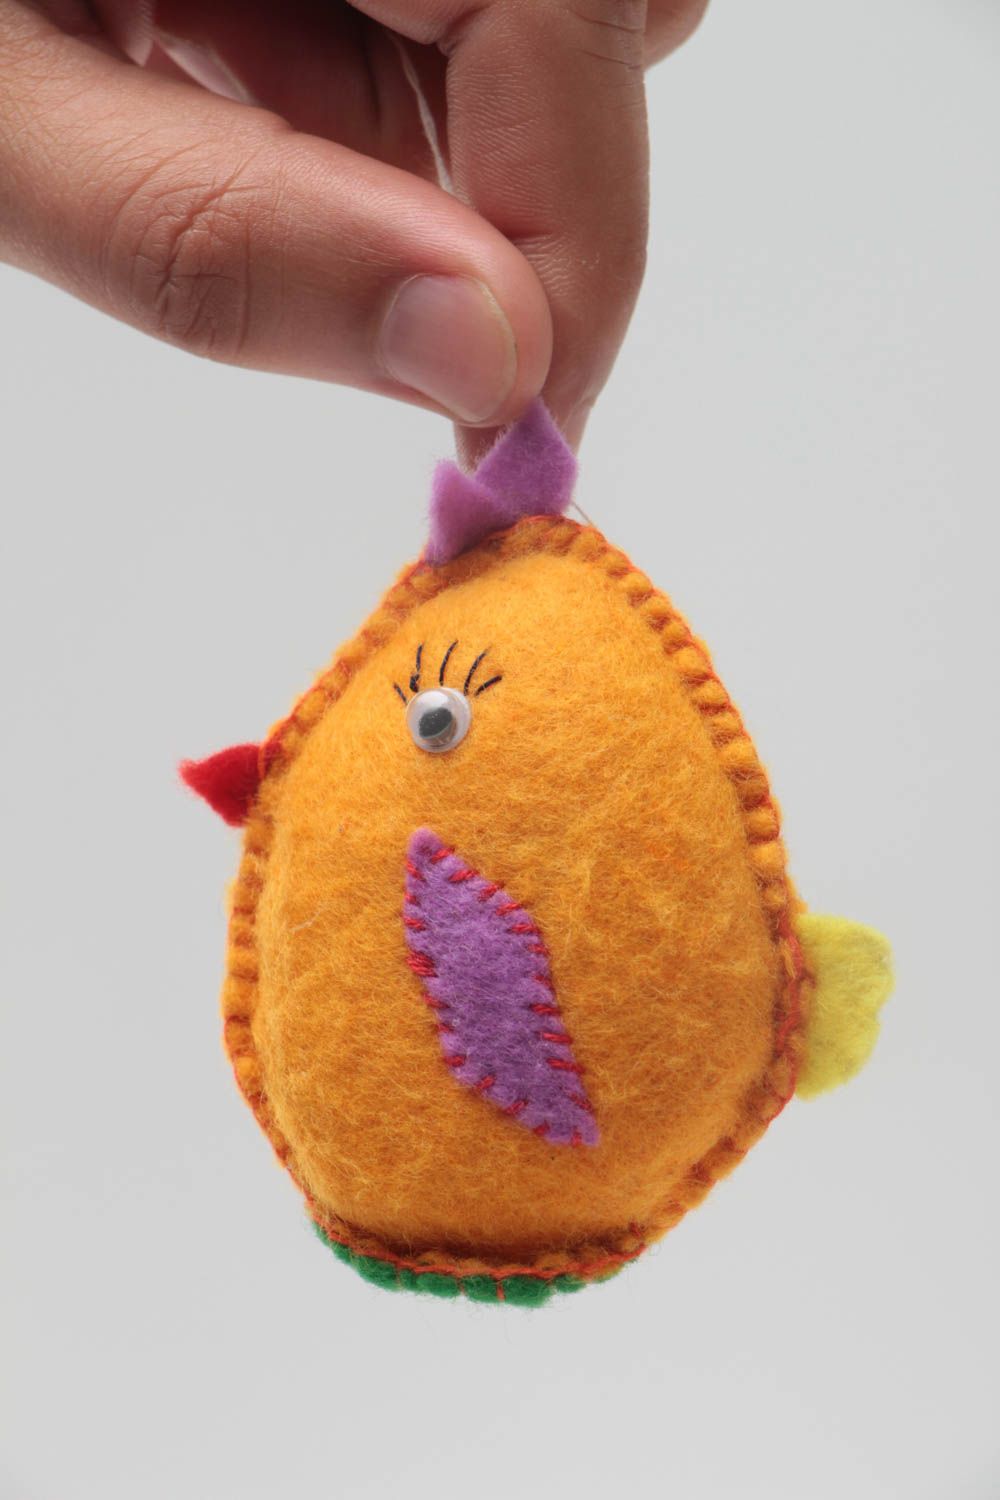 Handmade felt toy in the form of small yellow chick for children and decor photo 5